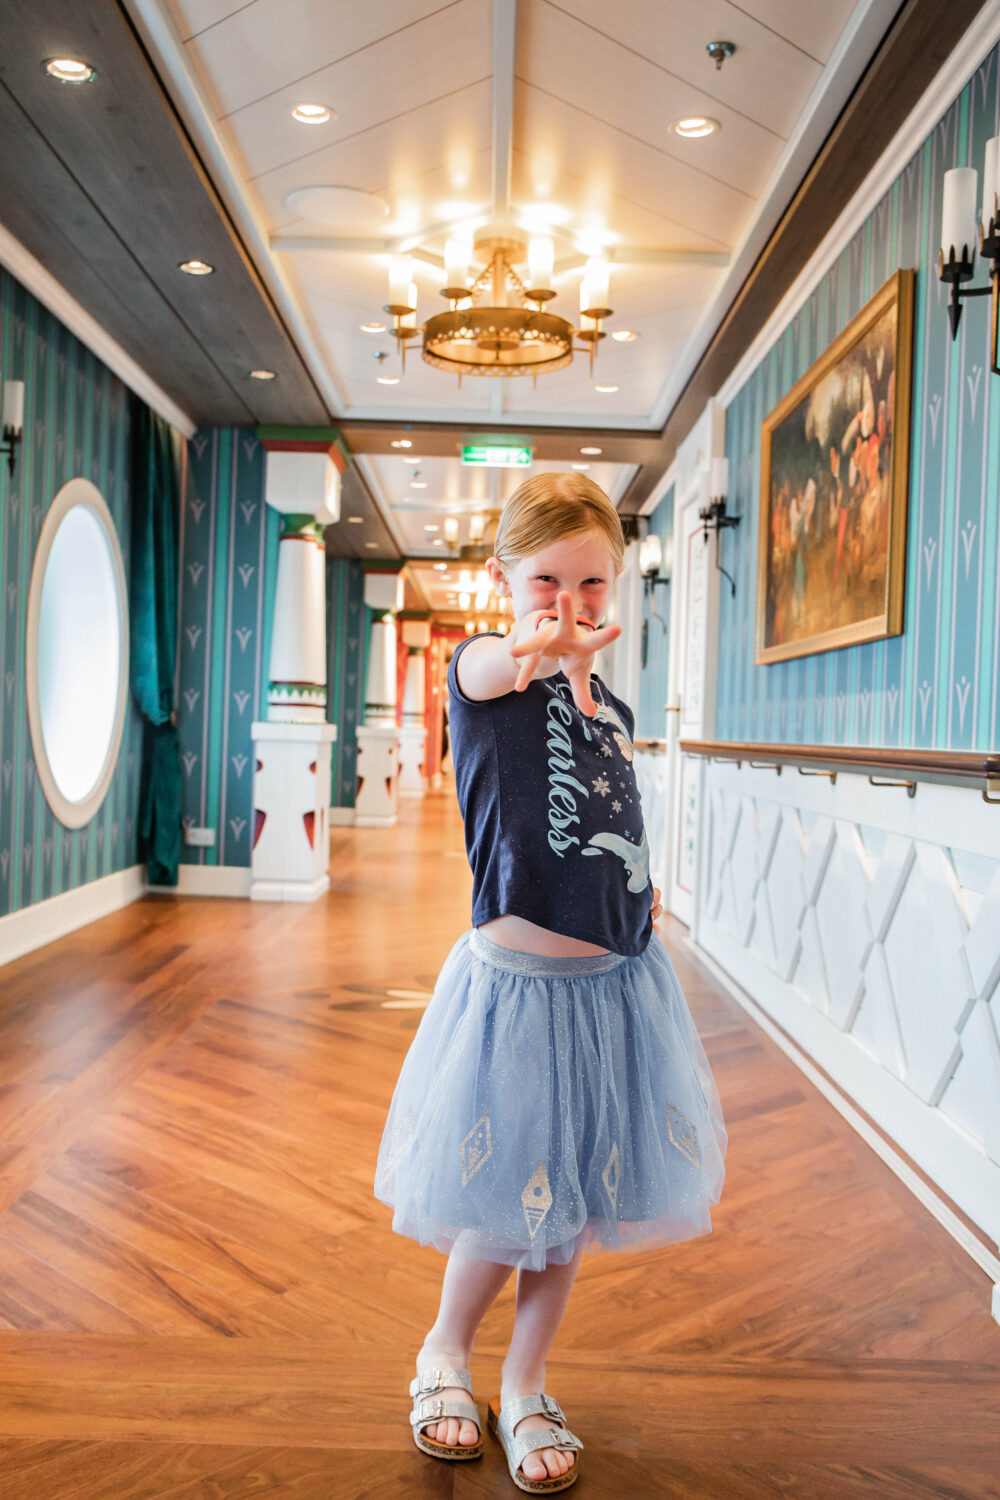 Sailing on the Disney Wish? The Arendelle Dining Experience is a MUST DO!